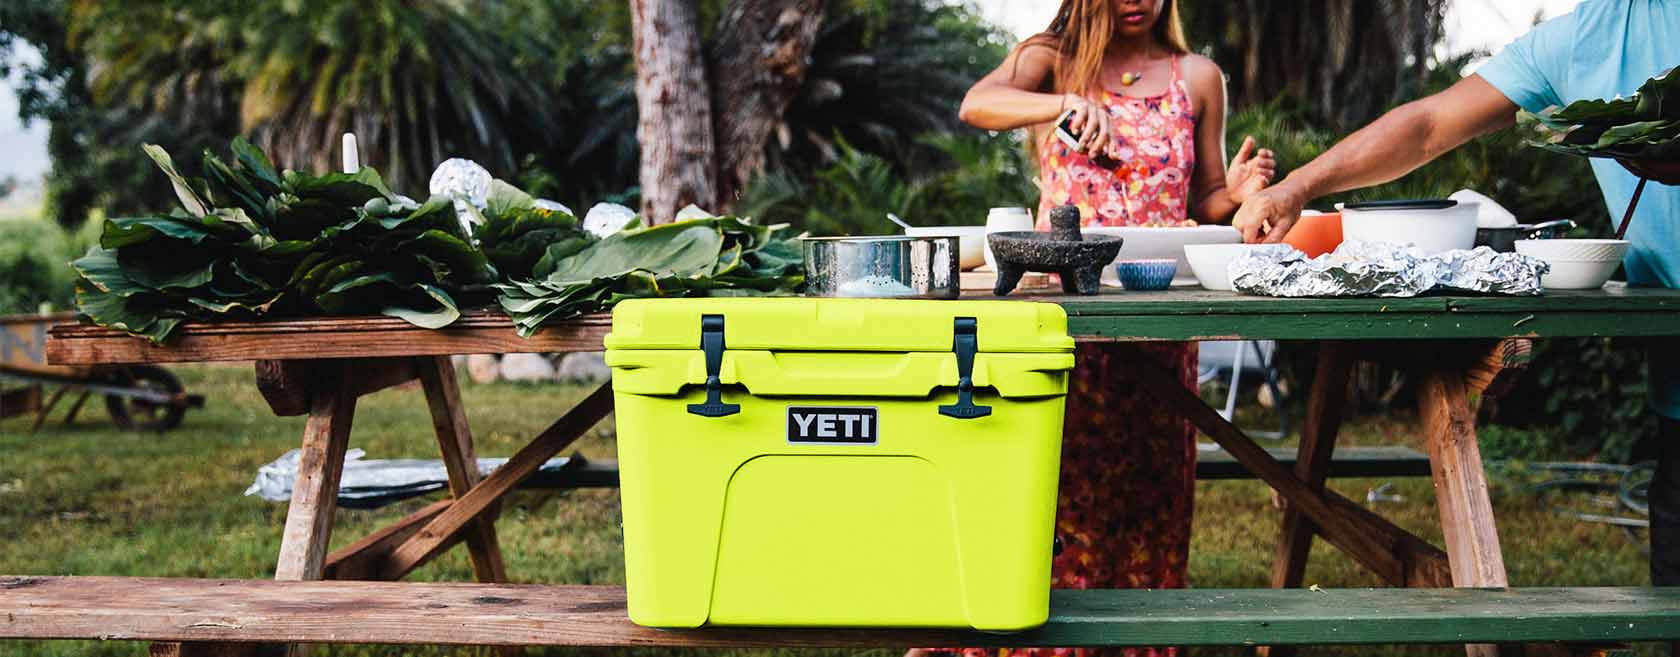 25 Yeti Promo Code In July 2020 Coupon Sale Free Shipping